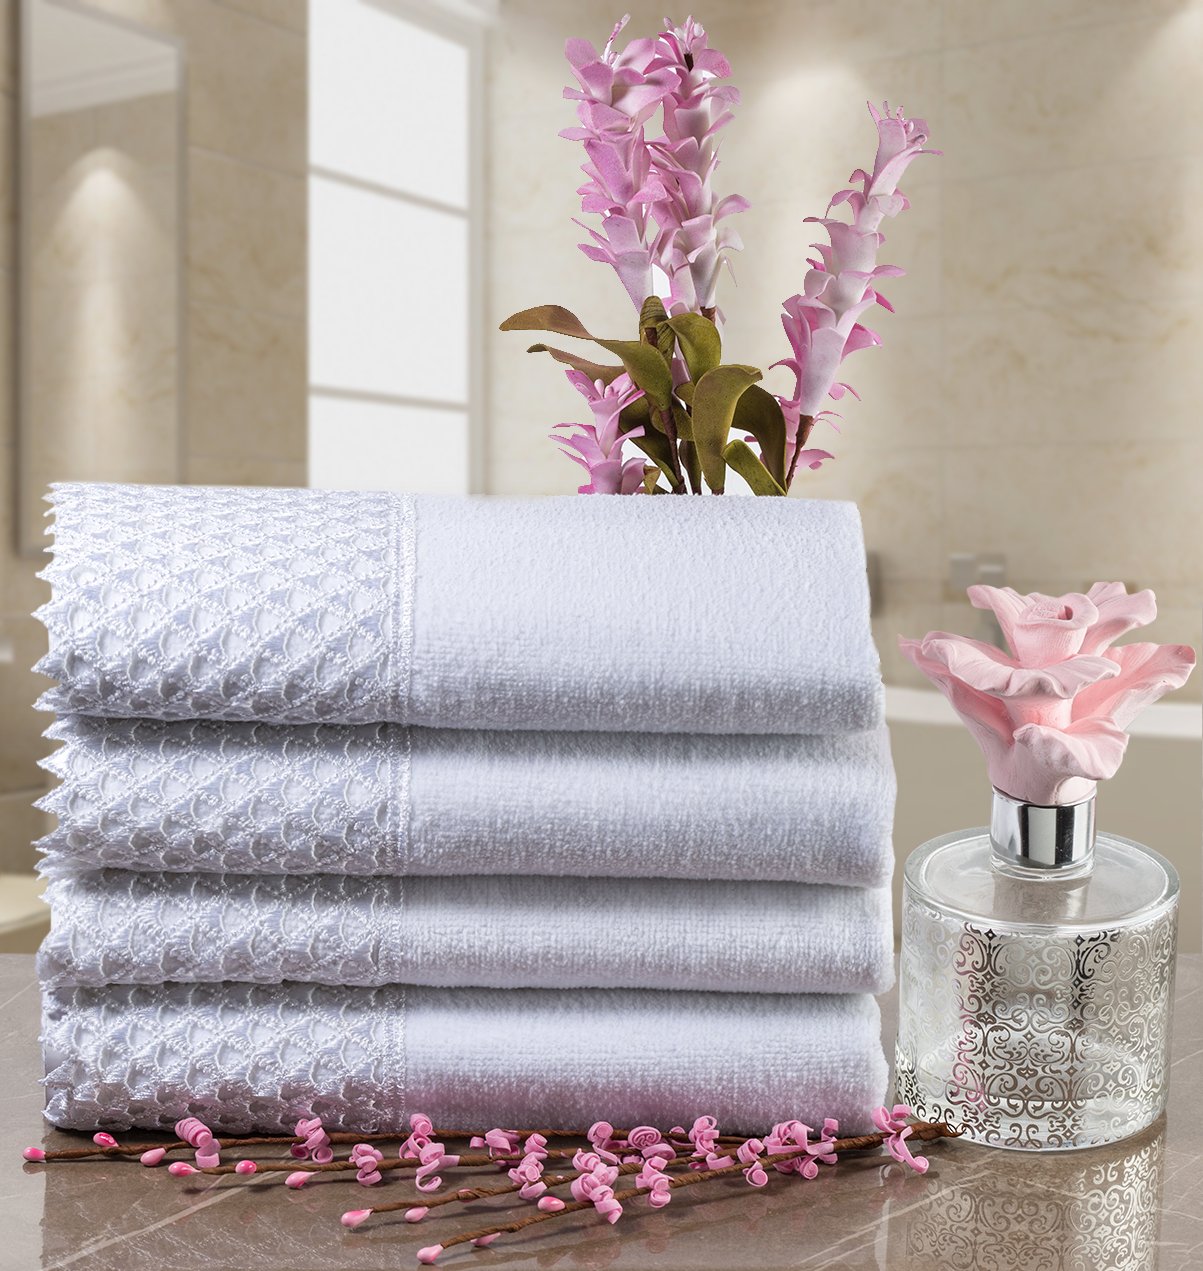 Creative Scents Decorative Fingertip Embellished White Gorgeous Lace Towels for Bathroom and Powder Room - 4 Pack 11 by 18" Cotton Velour Towel Set Packaged in Gift Box for Best Gift (White)  - Like New